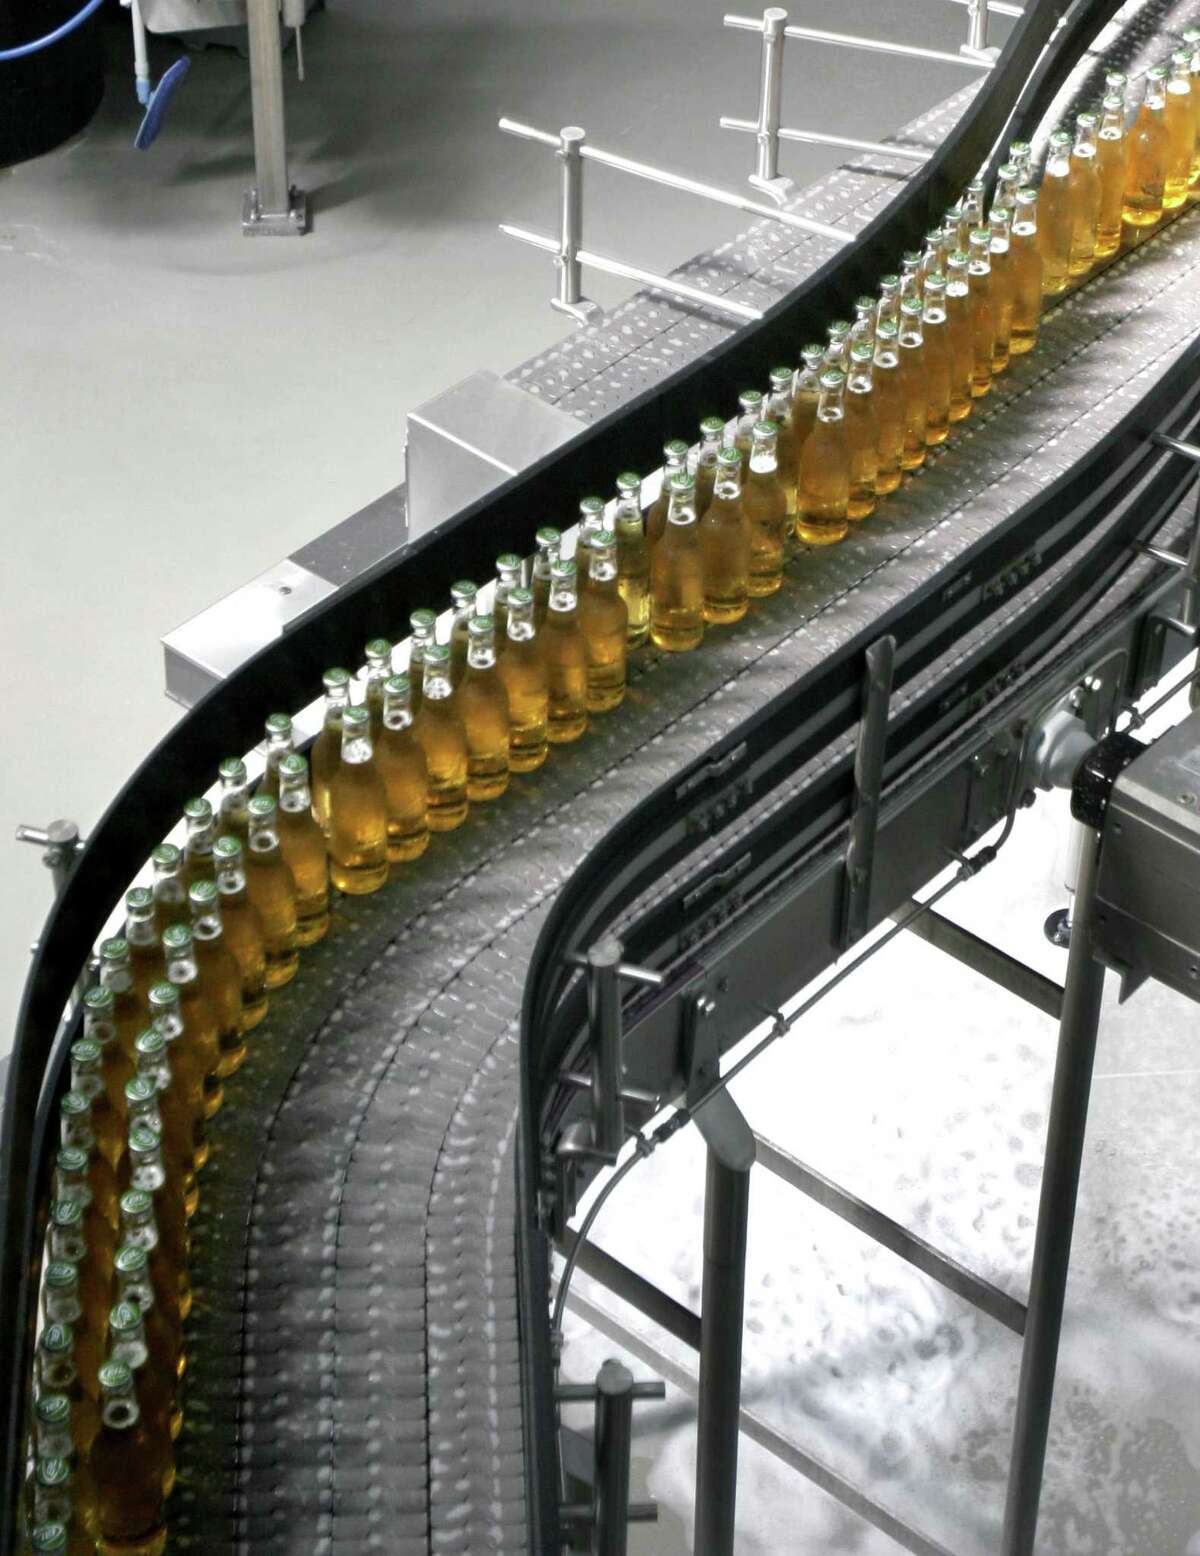 Bottles of beer move down a conveyor at the Anheuser-Busch brewery in St. Louis. It announced it would get 100 percent of its electricity from renewable sources by 2025 on Tuesday, the same day that President Donald Trump signed his executive order.